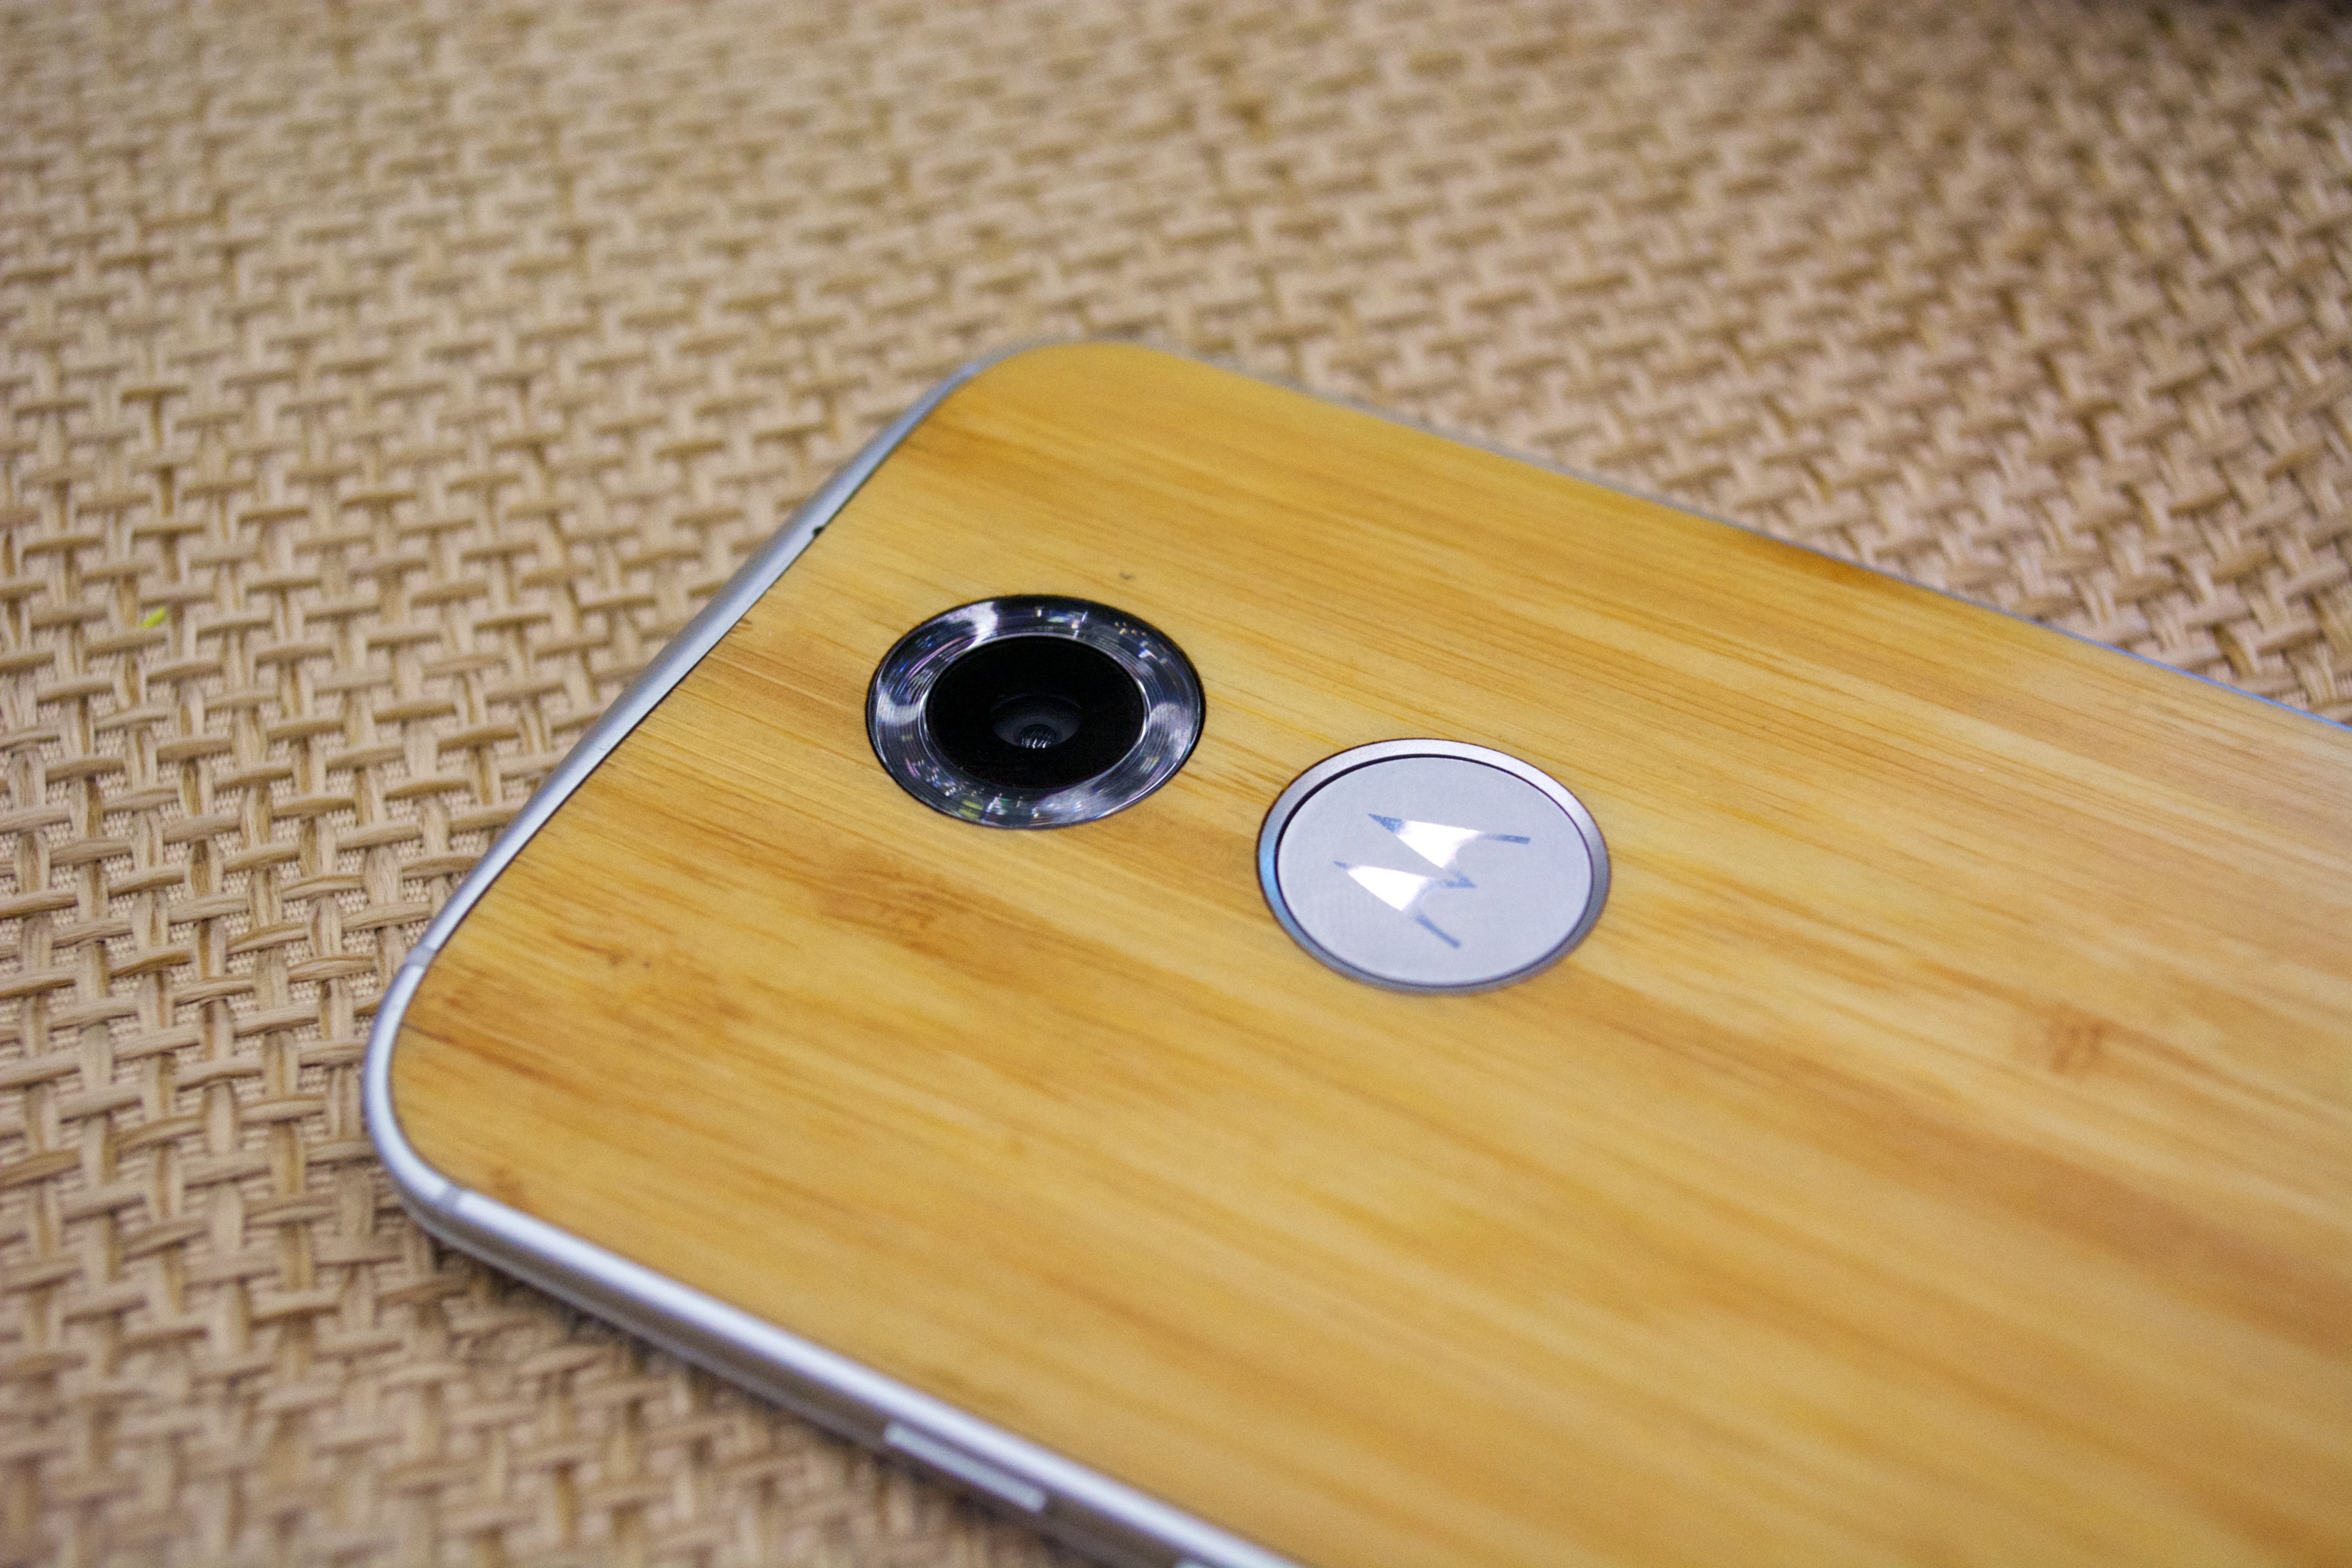 The new Moto X features a dual LED ring flash.